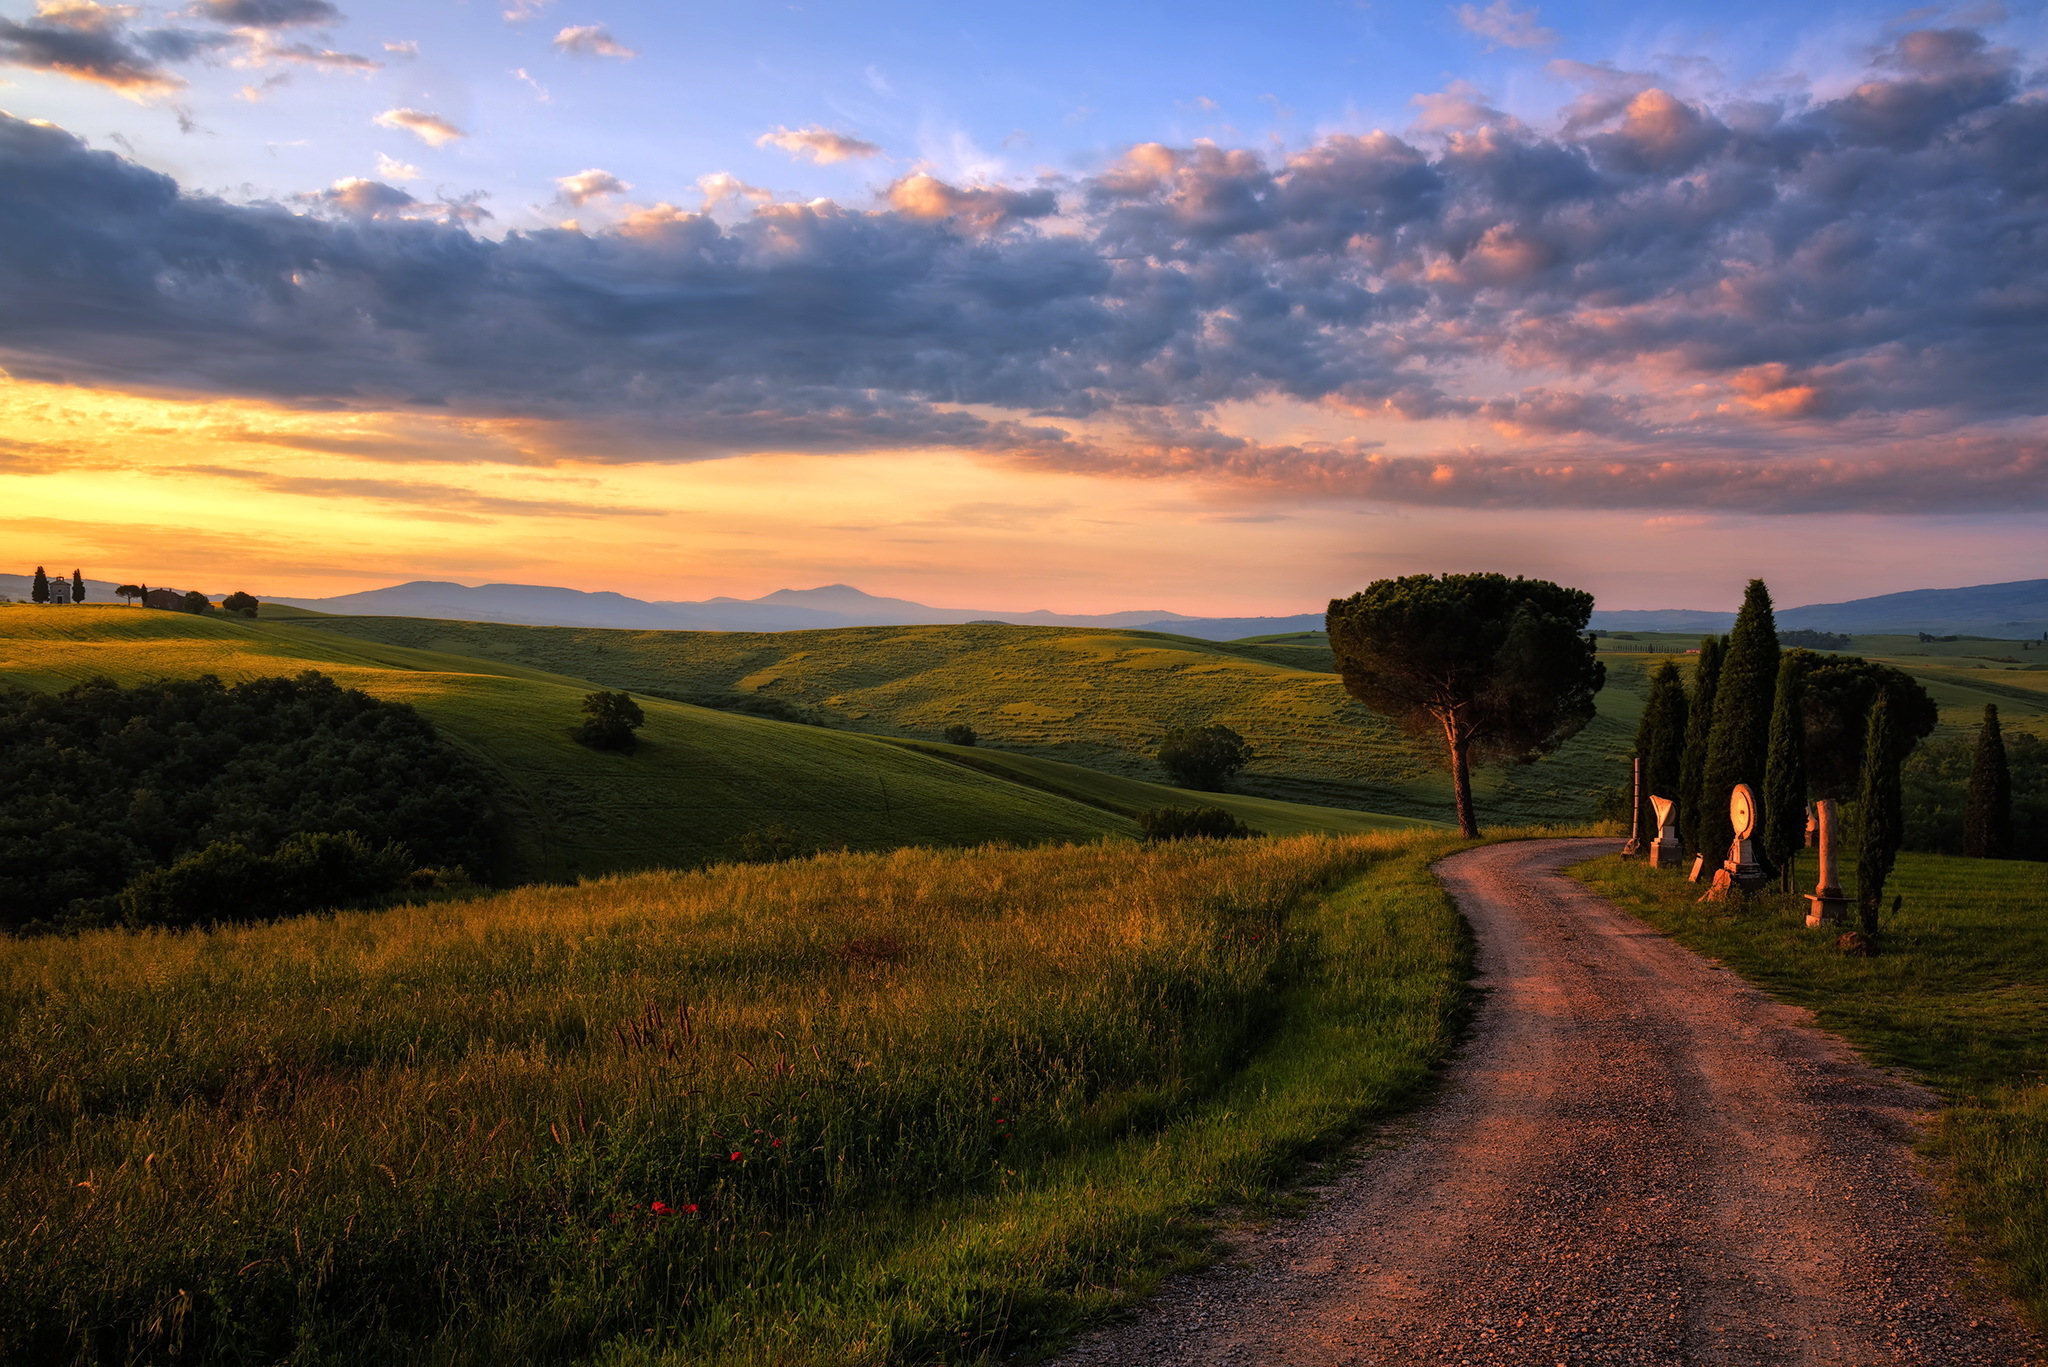 750 Tuscany Pictures Stunning  Download Free Images on Unsplash